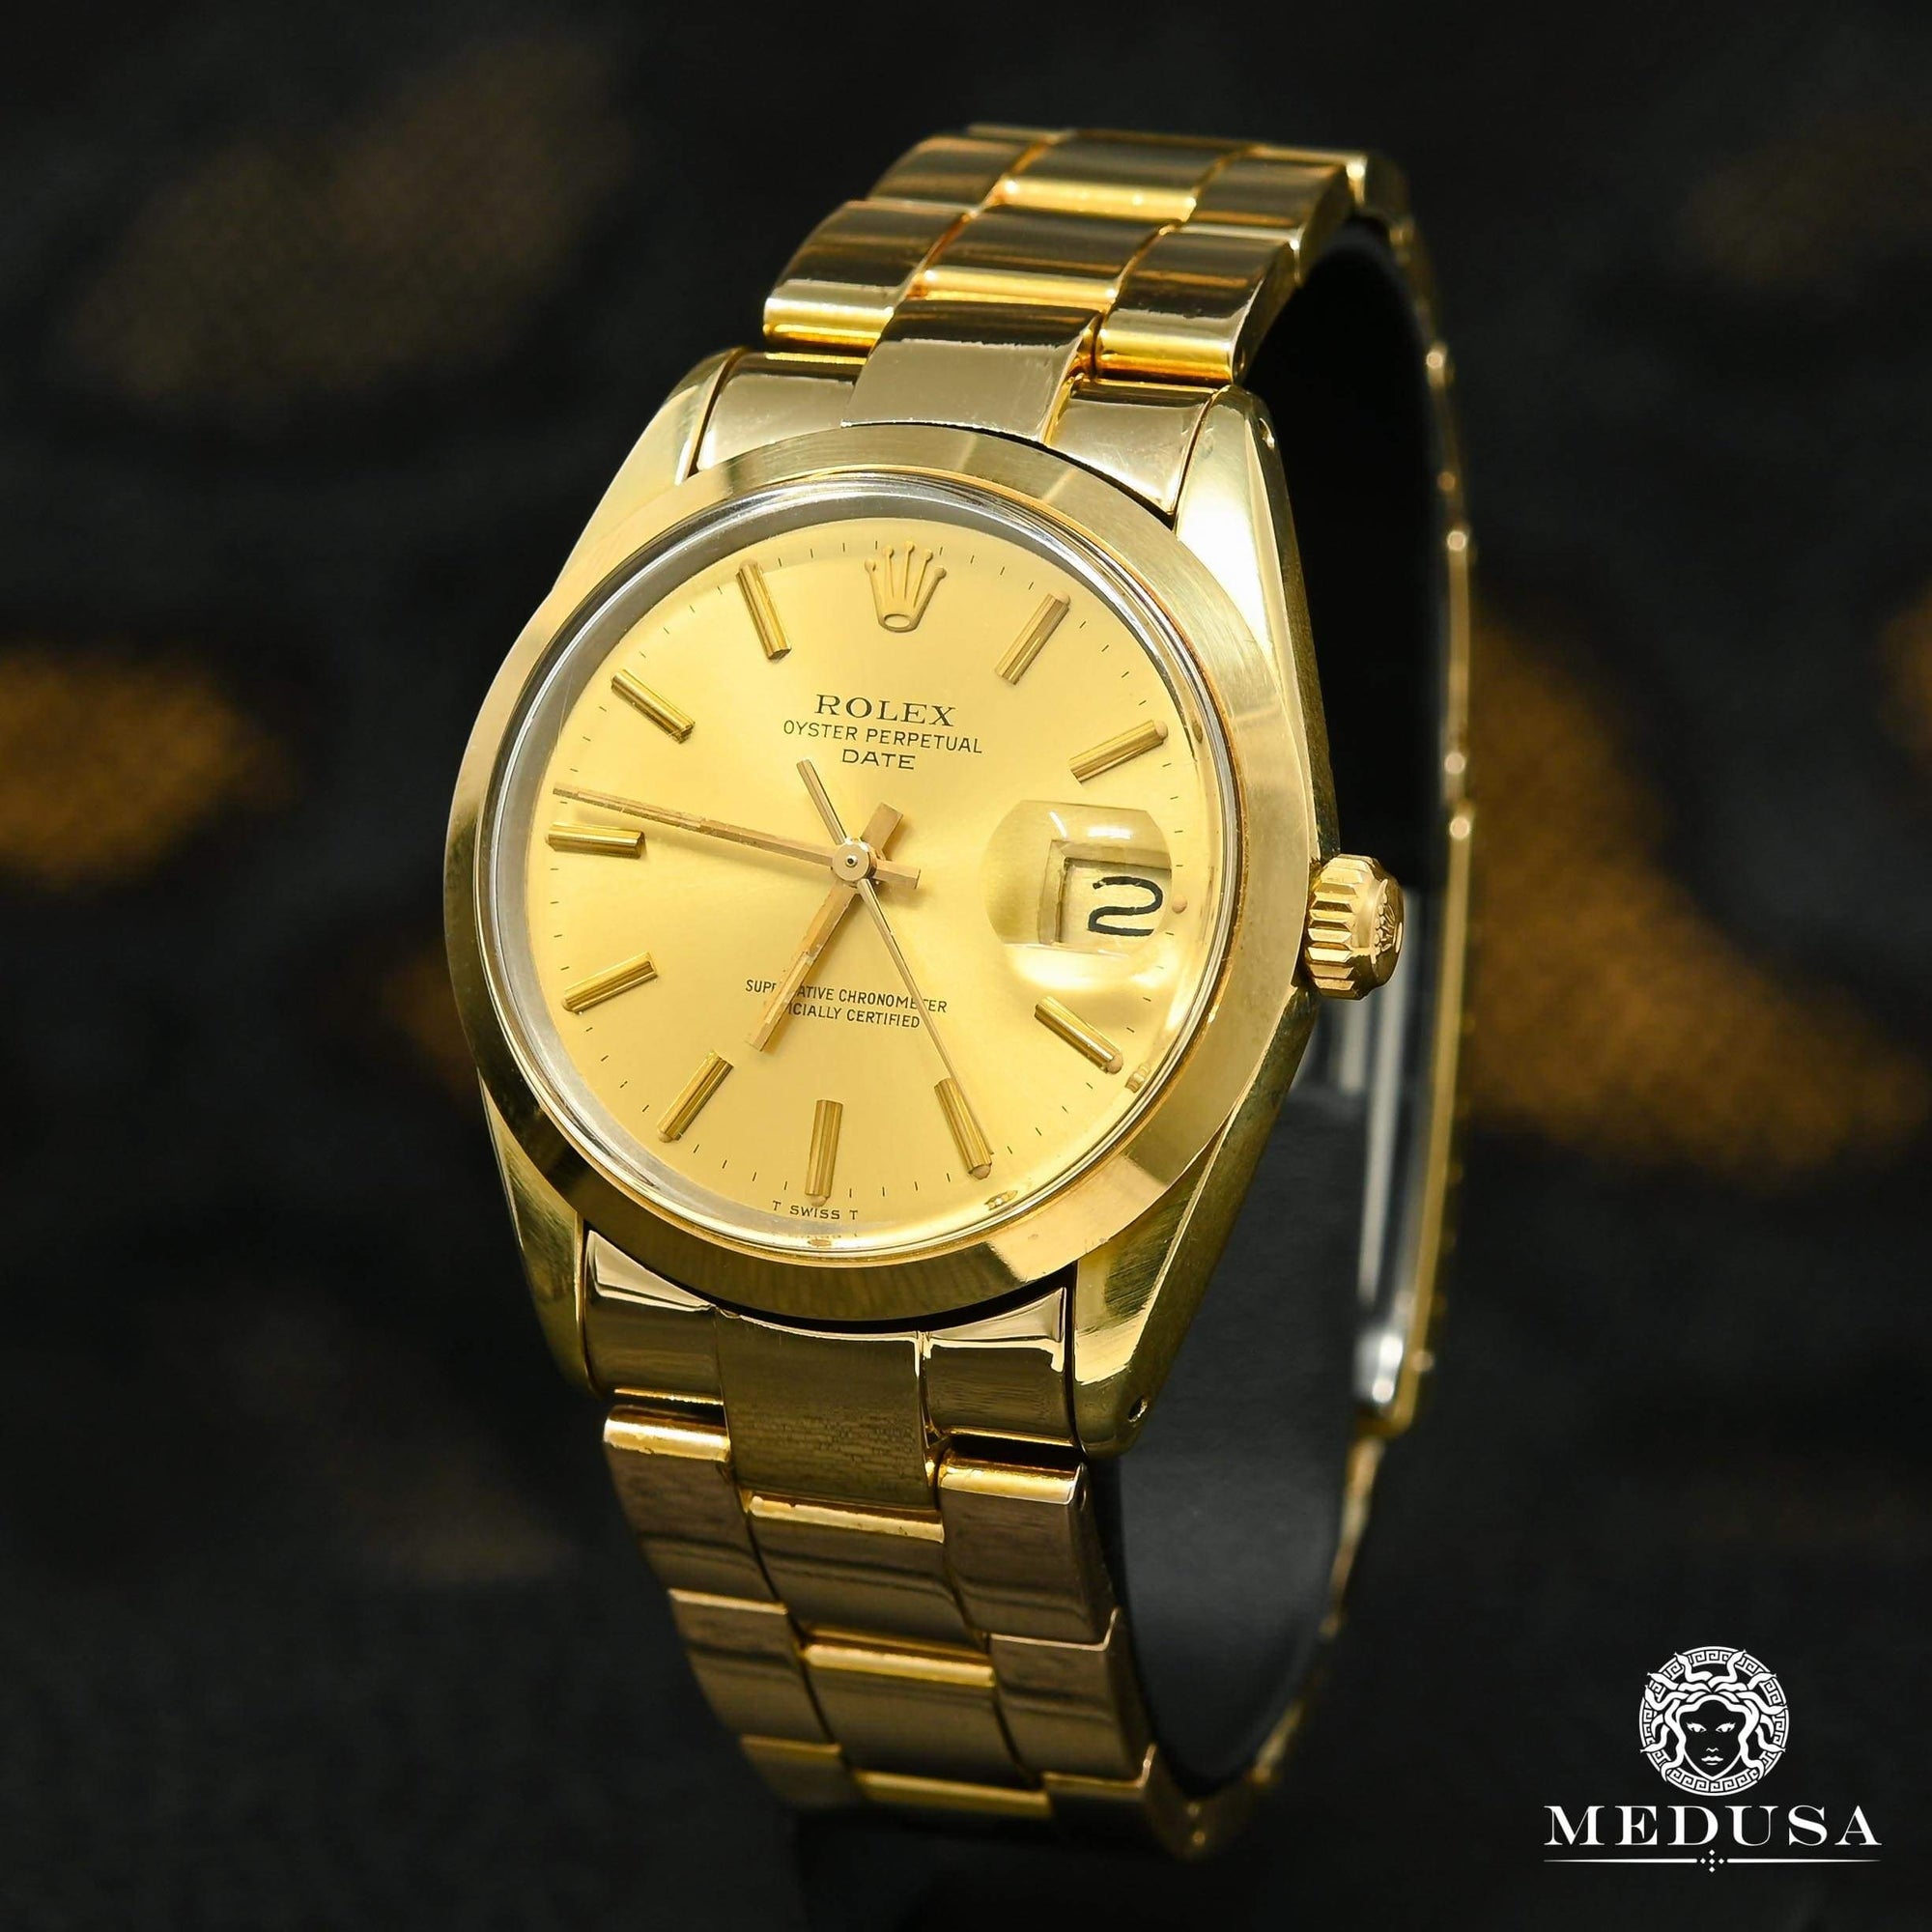 Montre Rolex | Montre Homme Rolex Oyster Perpetual Date 34mm - Gold Vintage Or Jaune